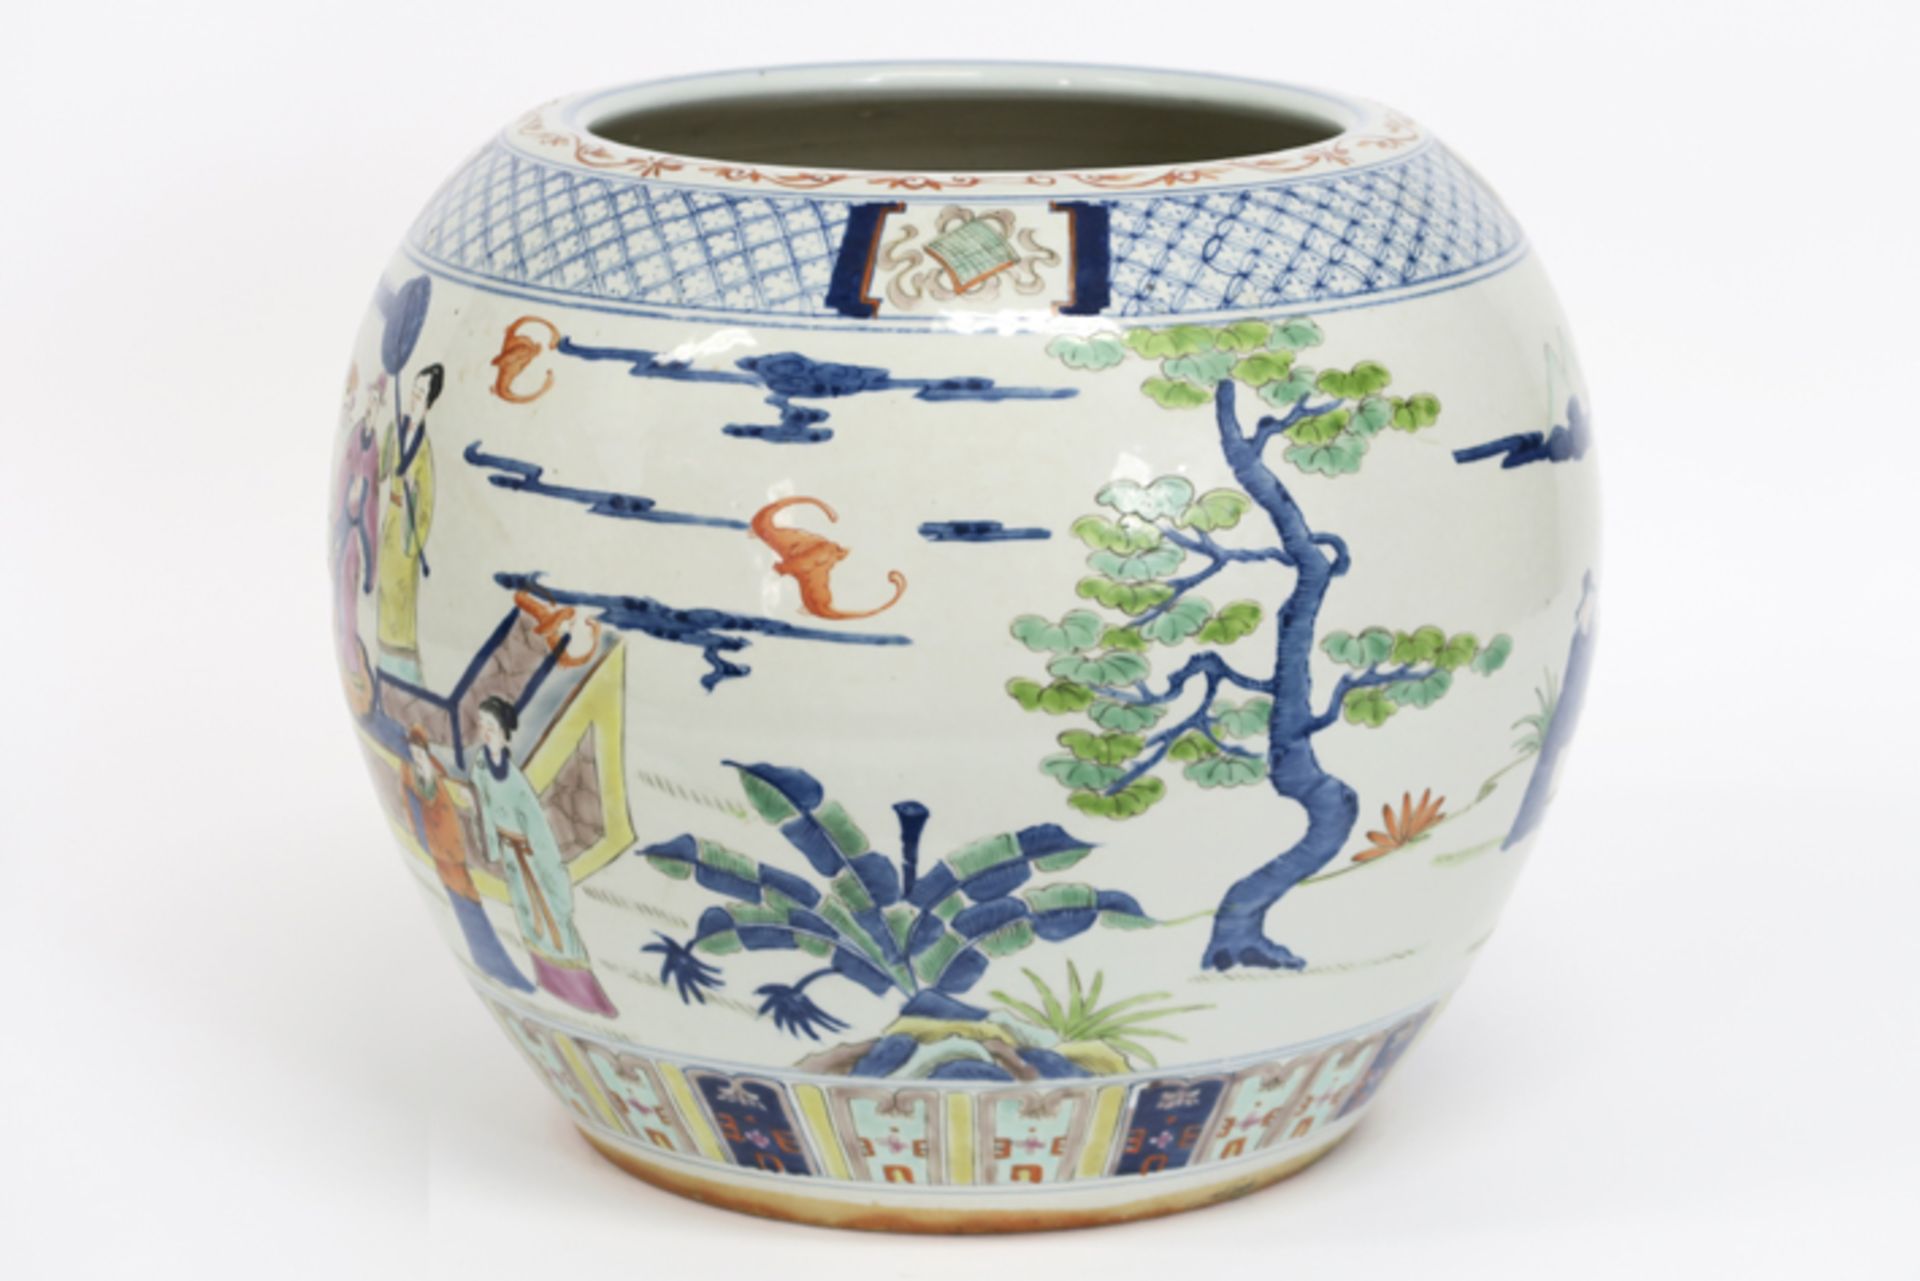 Chinese jardinier in porcelain with a polychrome figures decor - - Vrij grote [...] - Image 4 of 6